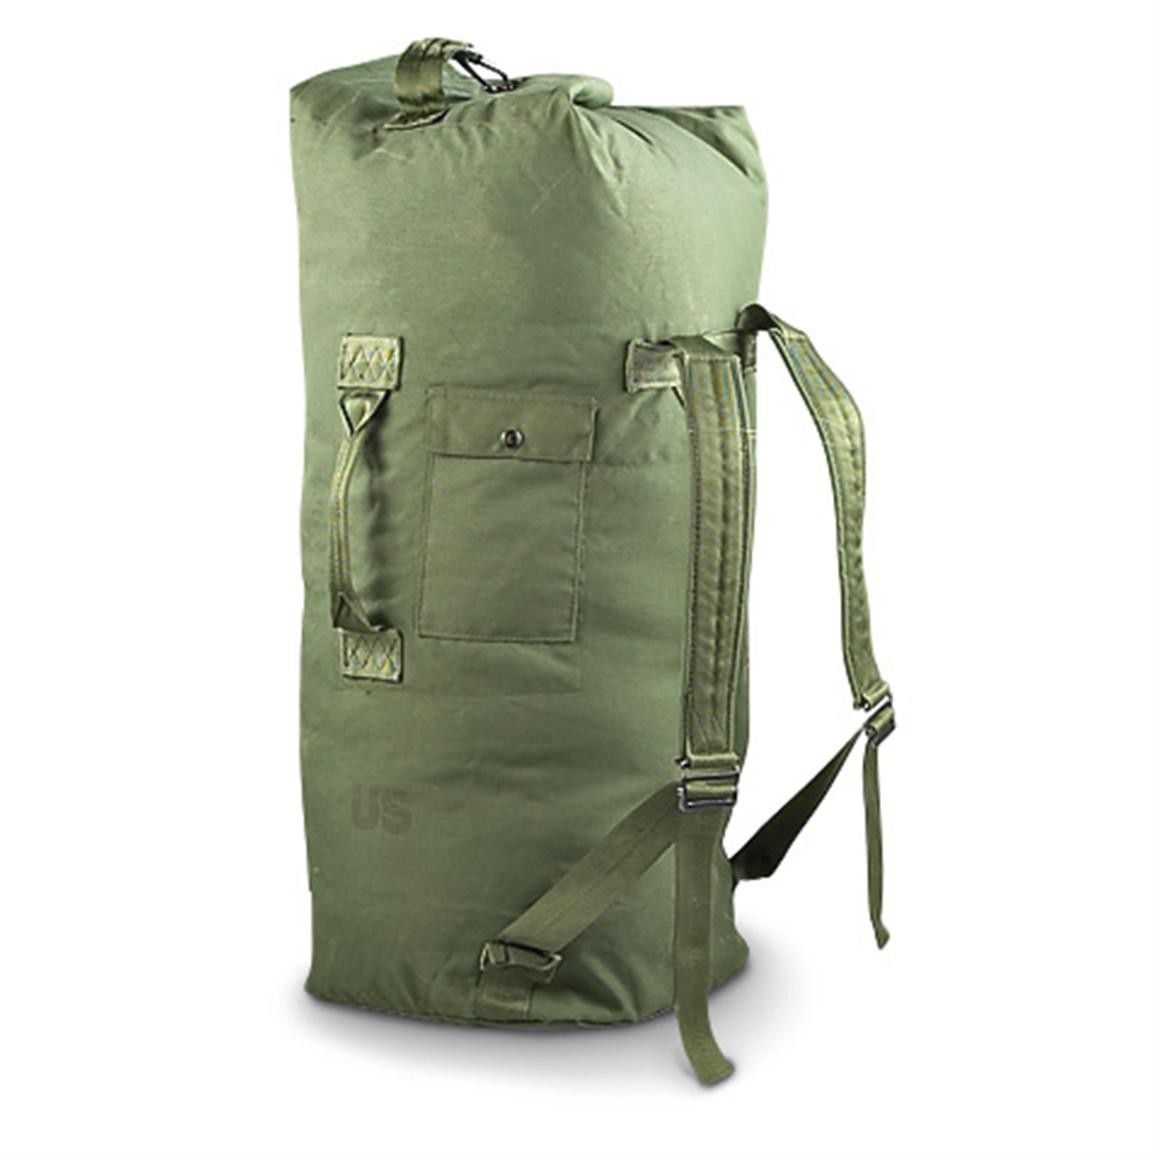 New Duffle bag military army green heavy duty sports travel camping